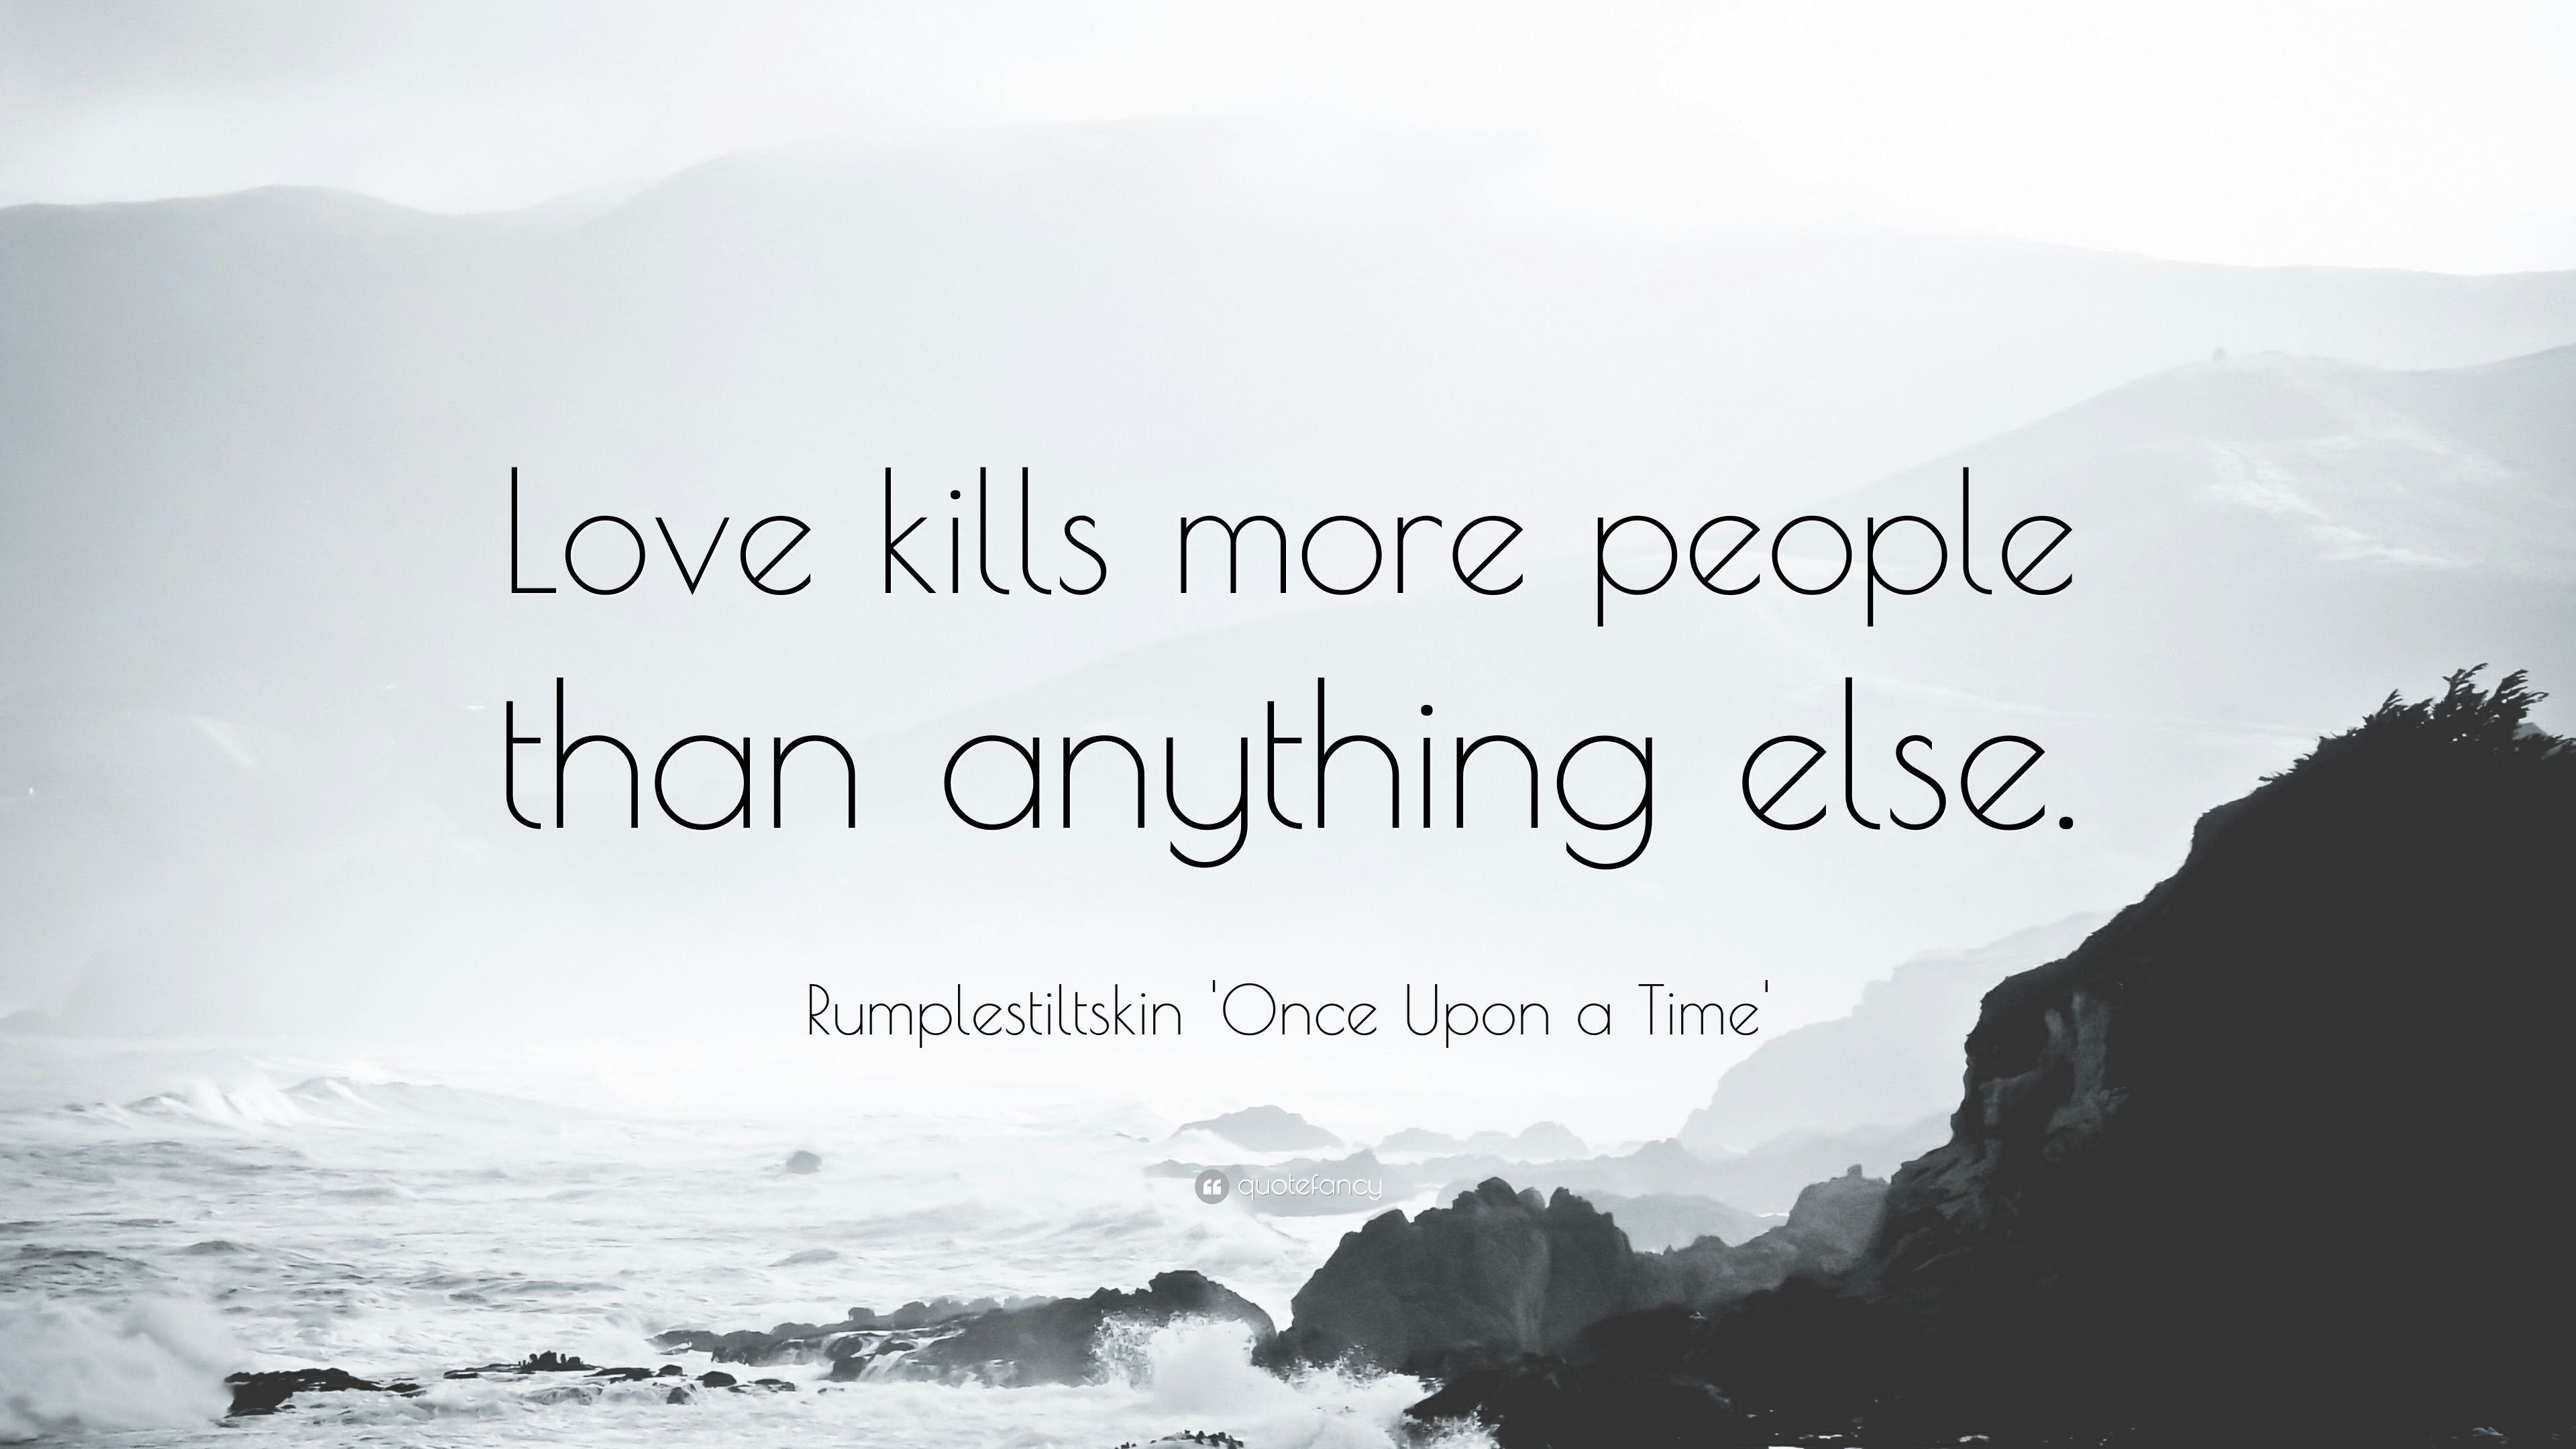 Rumplestiltskin 'Once Upon a Time' Quote: “Love kills more people than anything else.” (7 wallpaper)